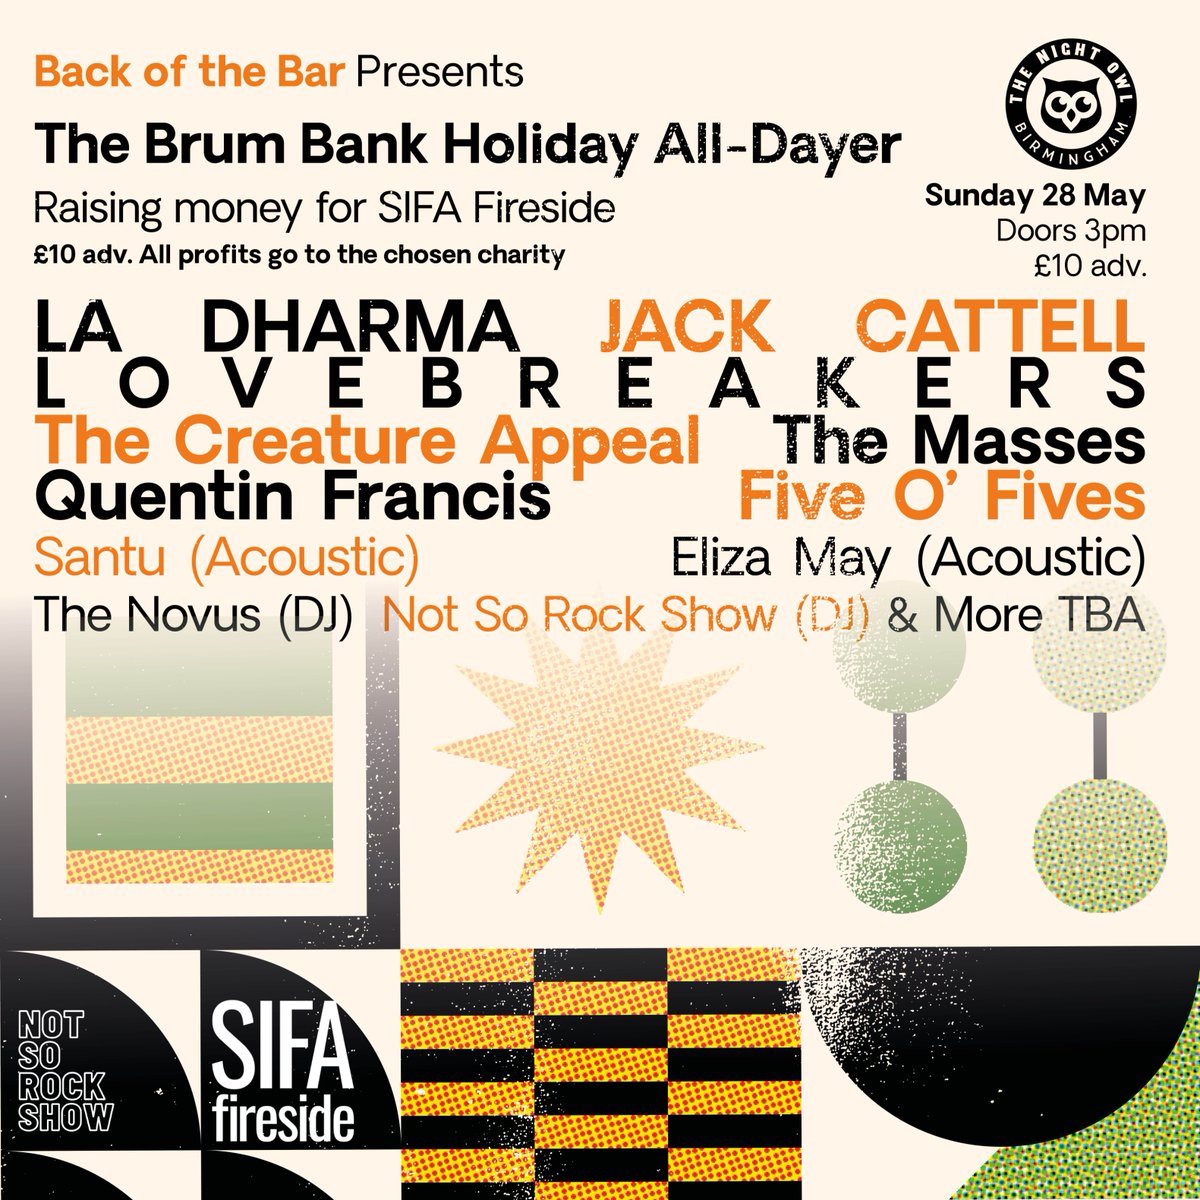 Just under 3 weeks to go til Back of the Bar's charity all-dayer!📆

Get ready for a whole day of live music from Santu, @elizamaymusic, @thefiveofives, @QuentinFrancis_,  The Masses, @LOVEBREAKERSx, @JCattellMusic & @ladharmaband 🙌

Book here 👉 bit.ly/BOTBAllDayer